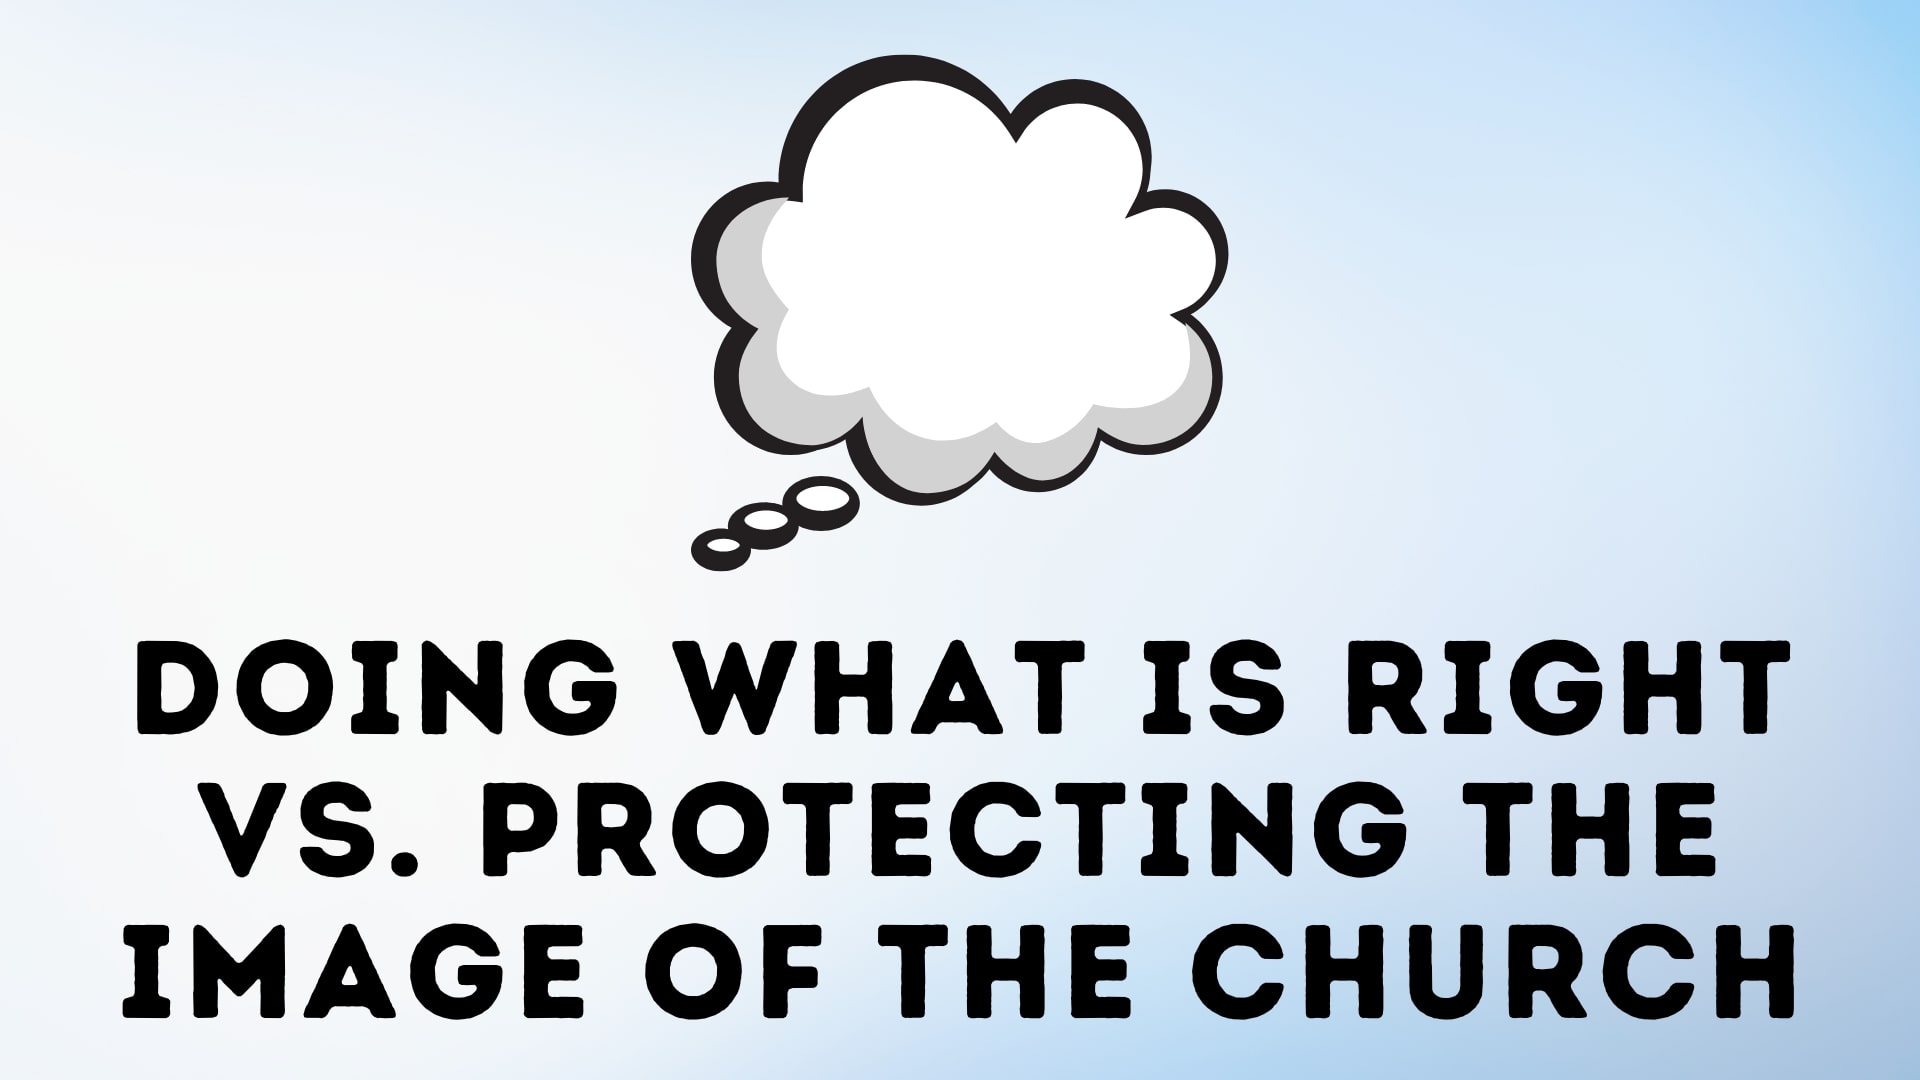 Doing what is right vs. Protecting the image of the church